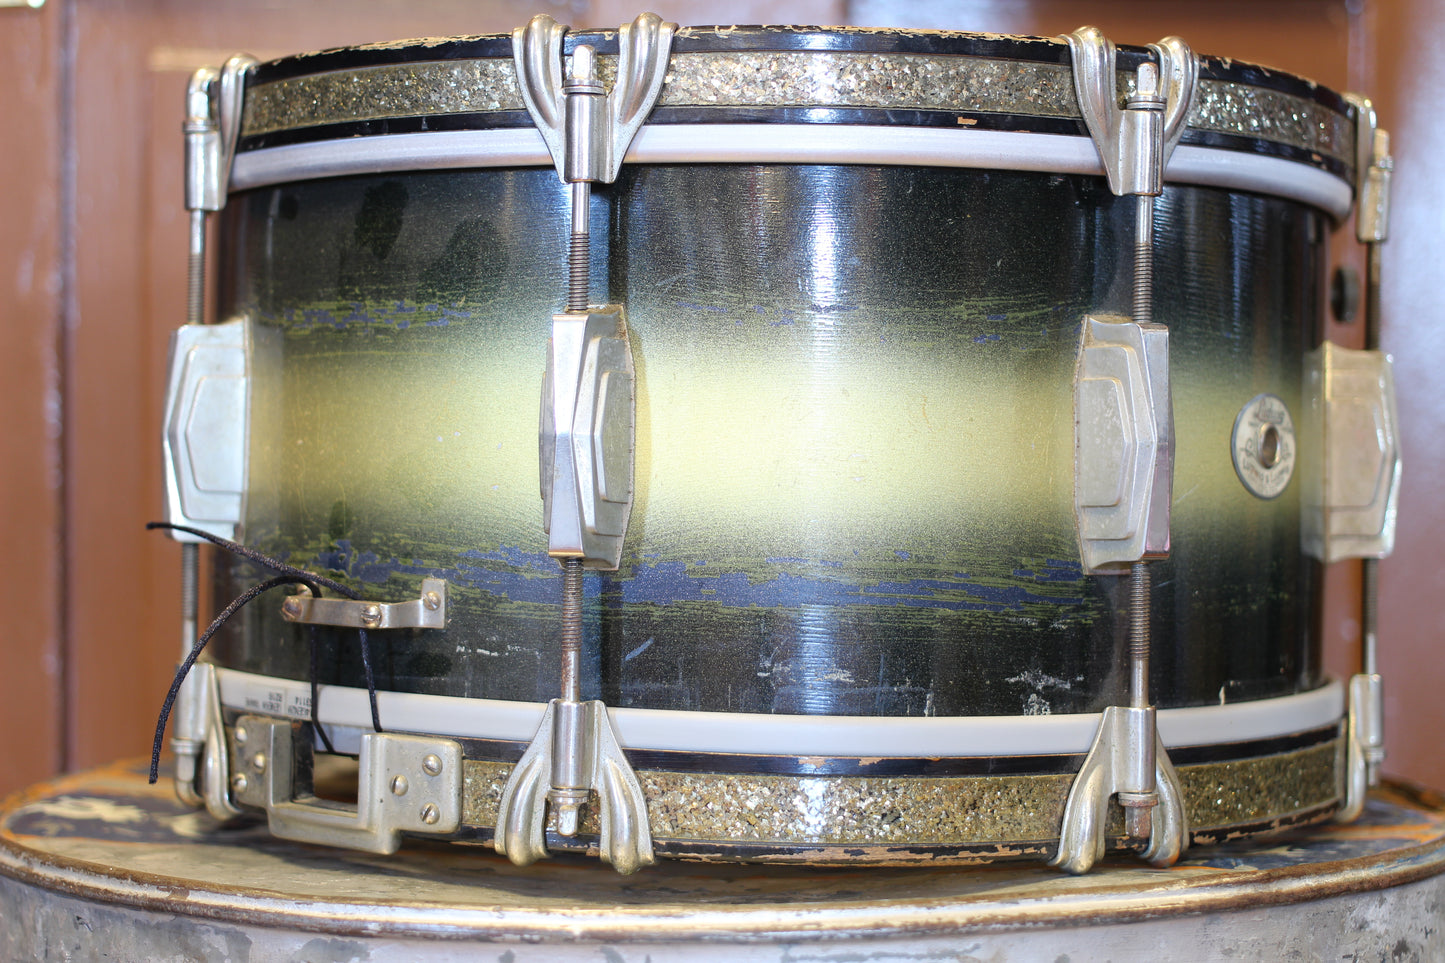 1939 Ludwig Standard Swing Model Snare Drum 7"x14" in Blue & Silver Duco